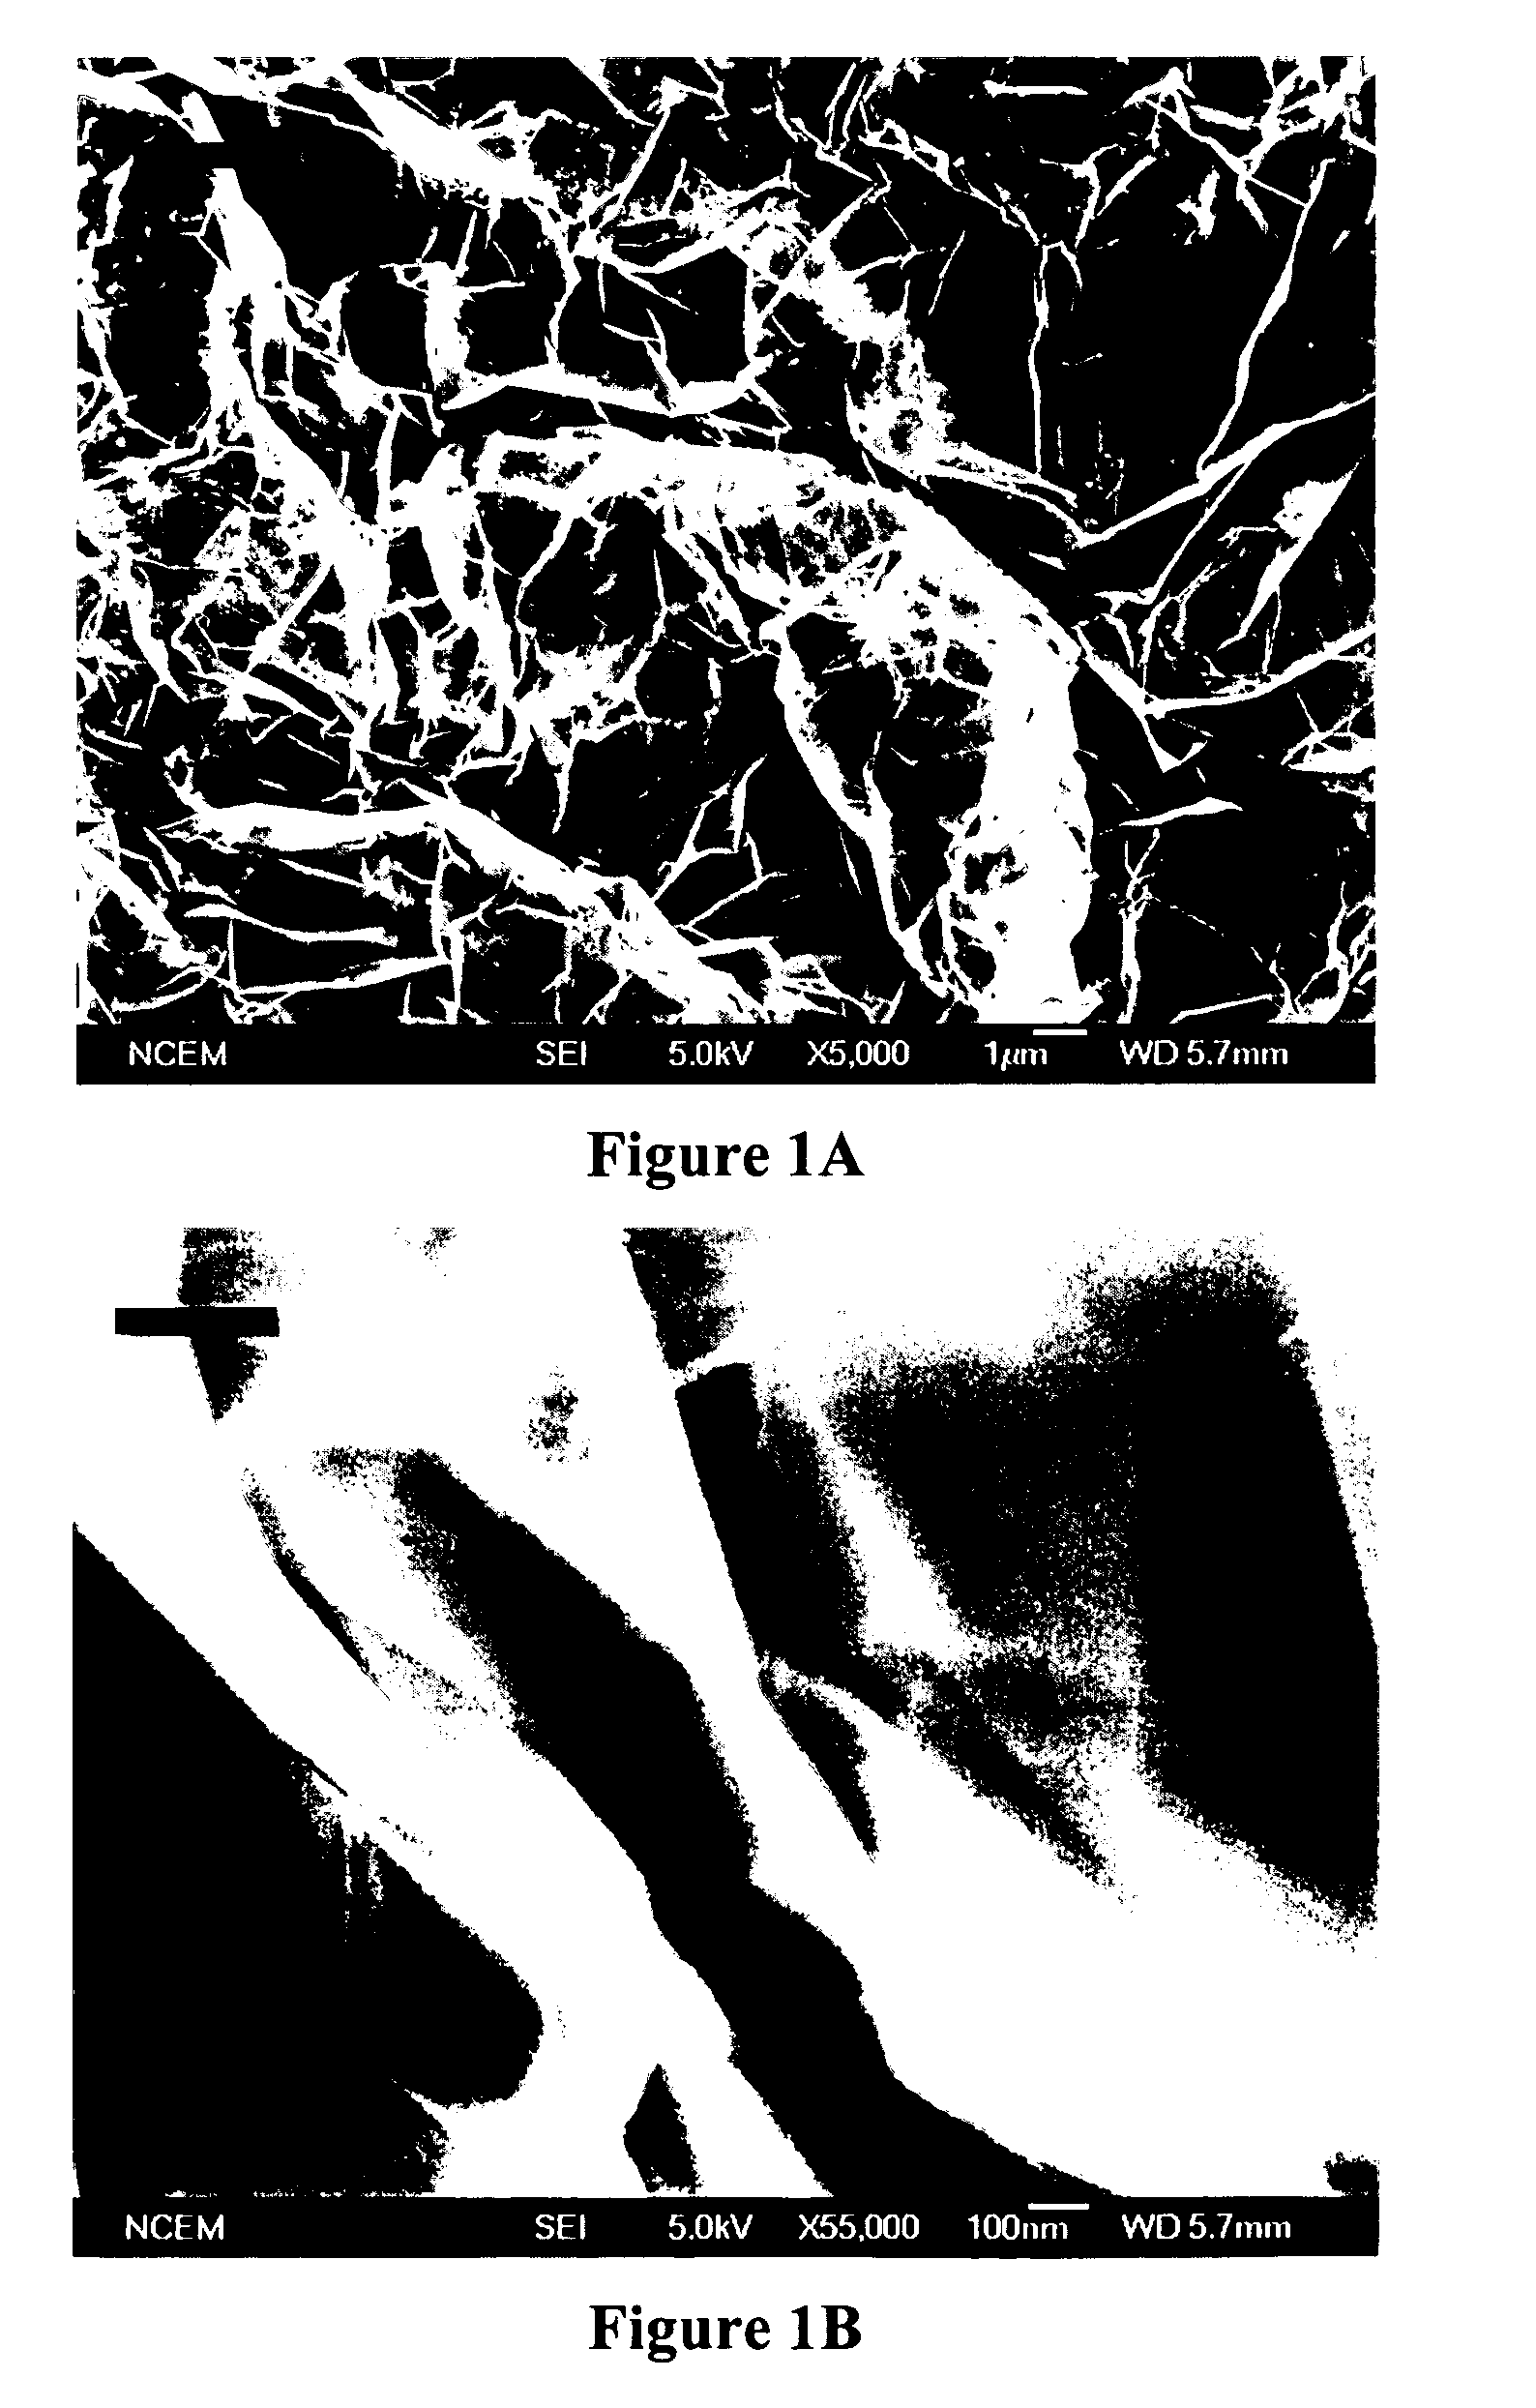 Compositions and methods for medical use of graphene-containing compositions